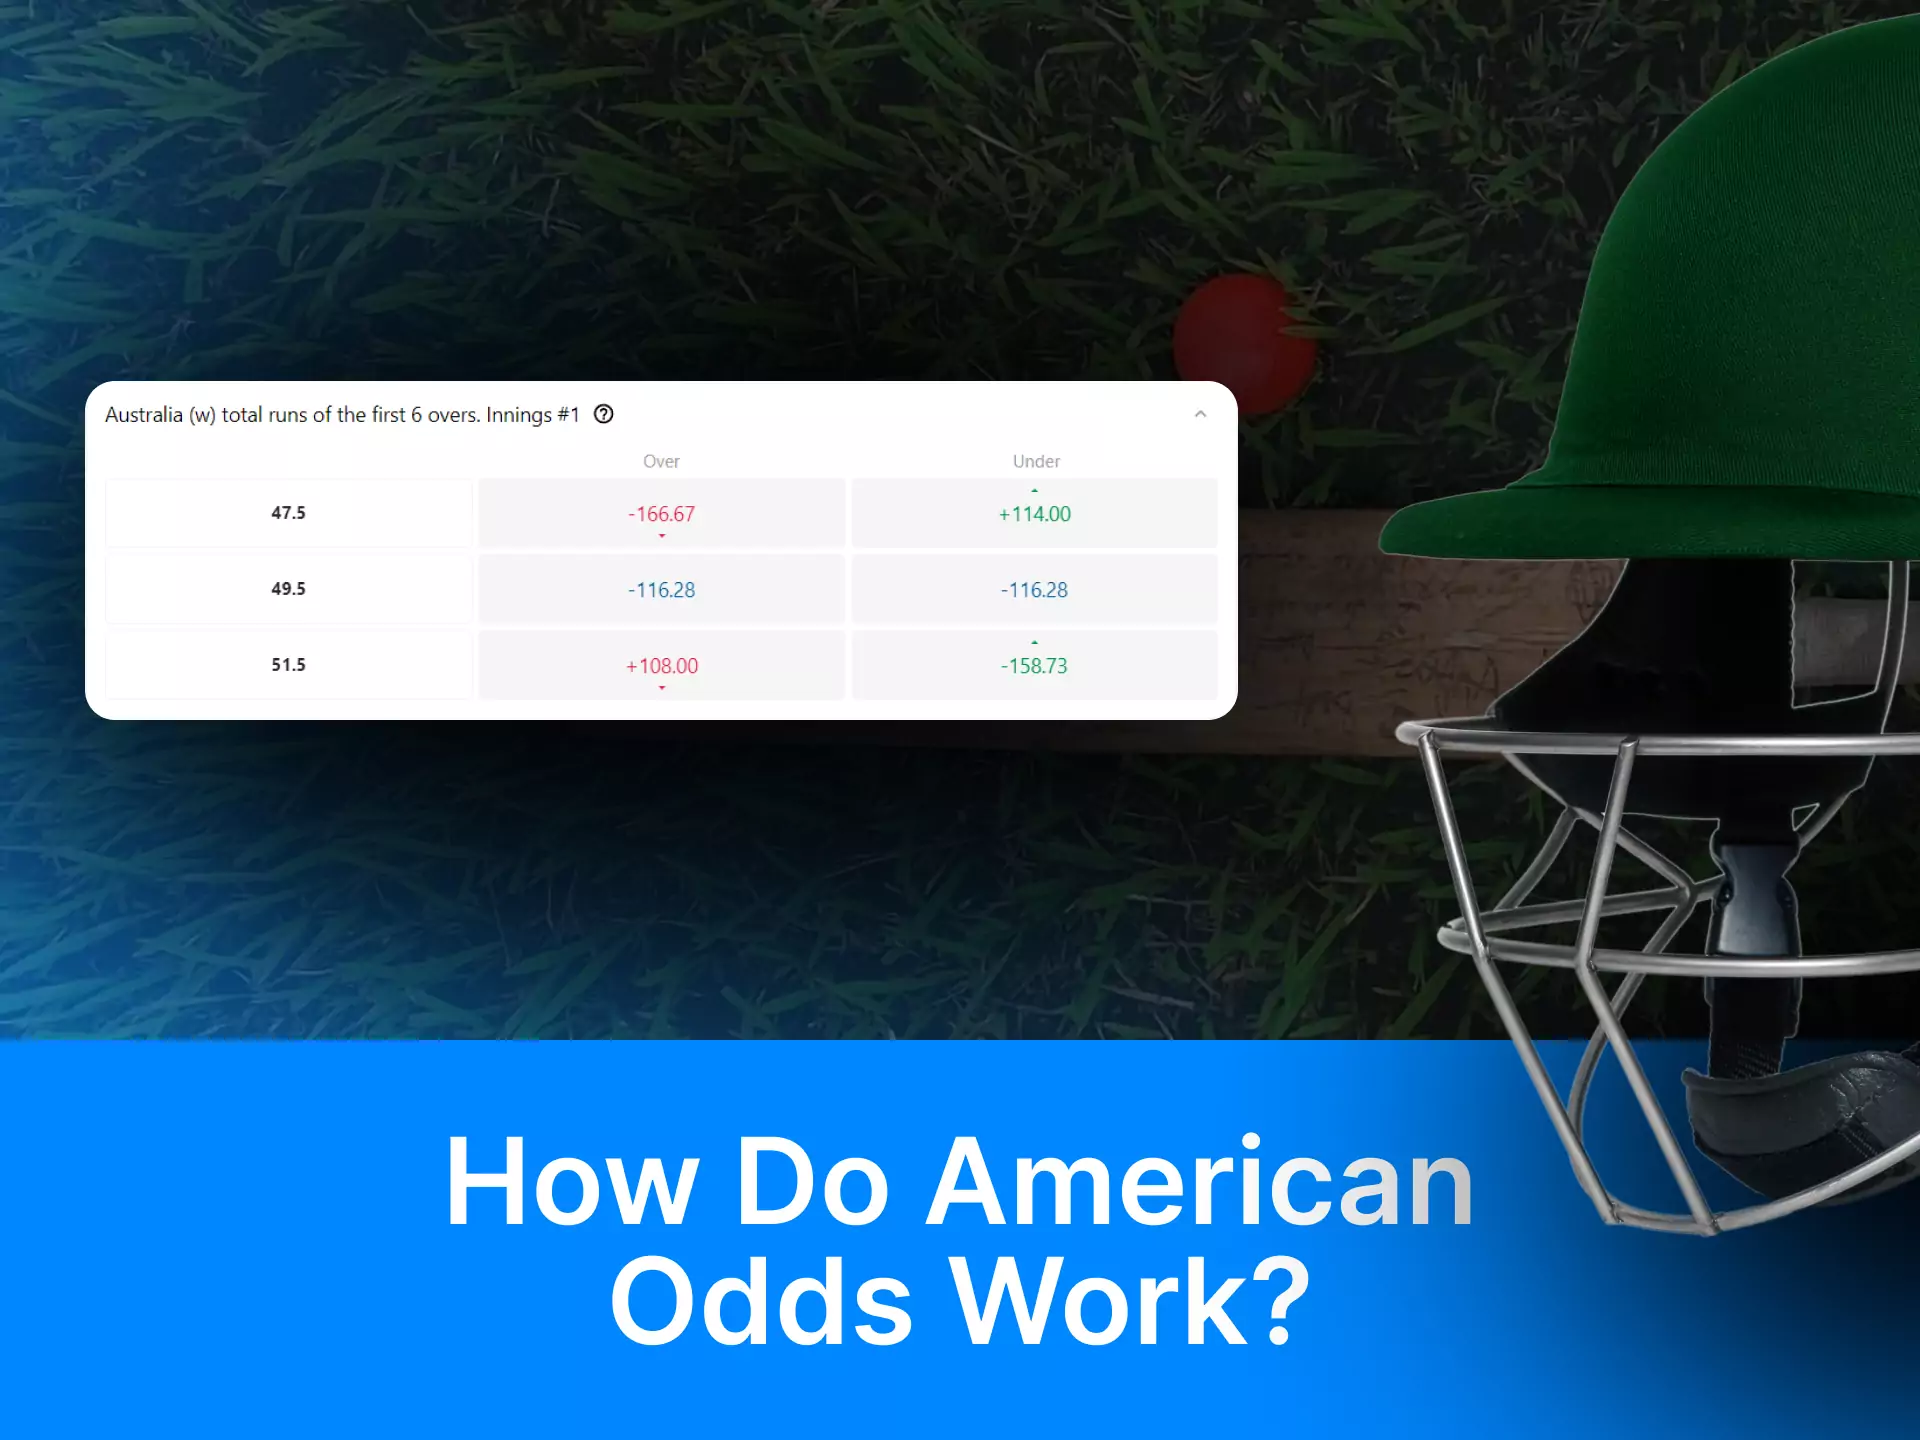 Learn how American coefficients work.